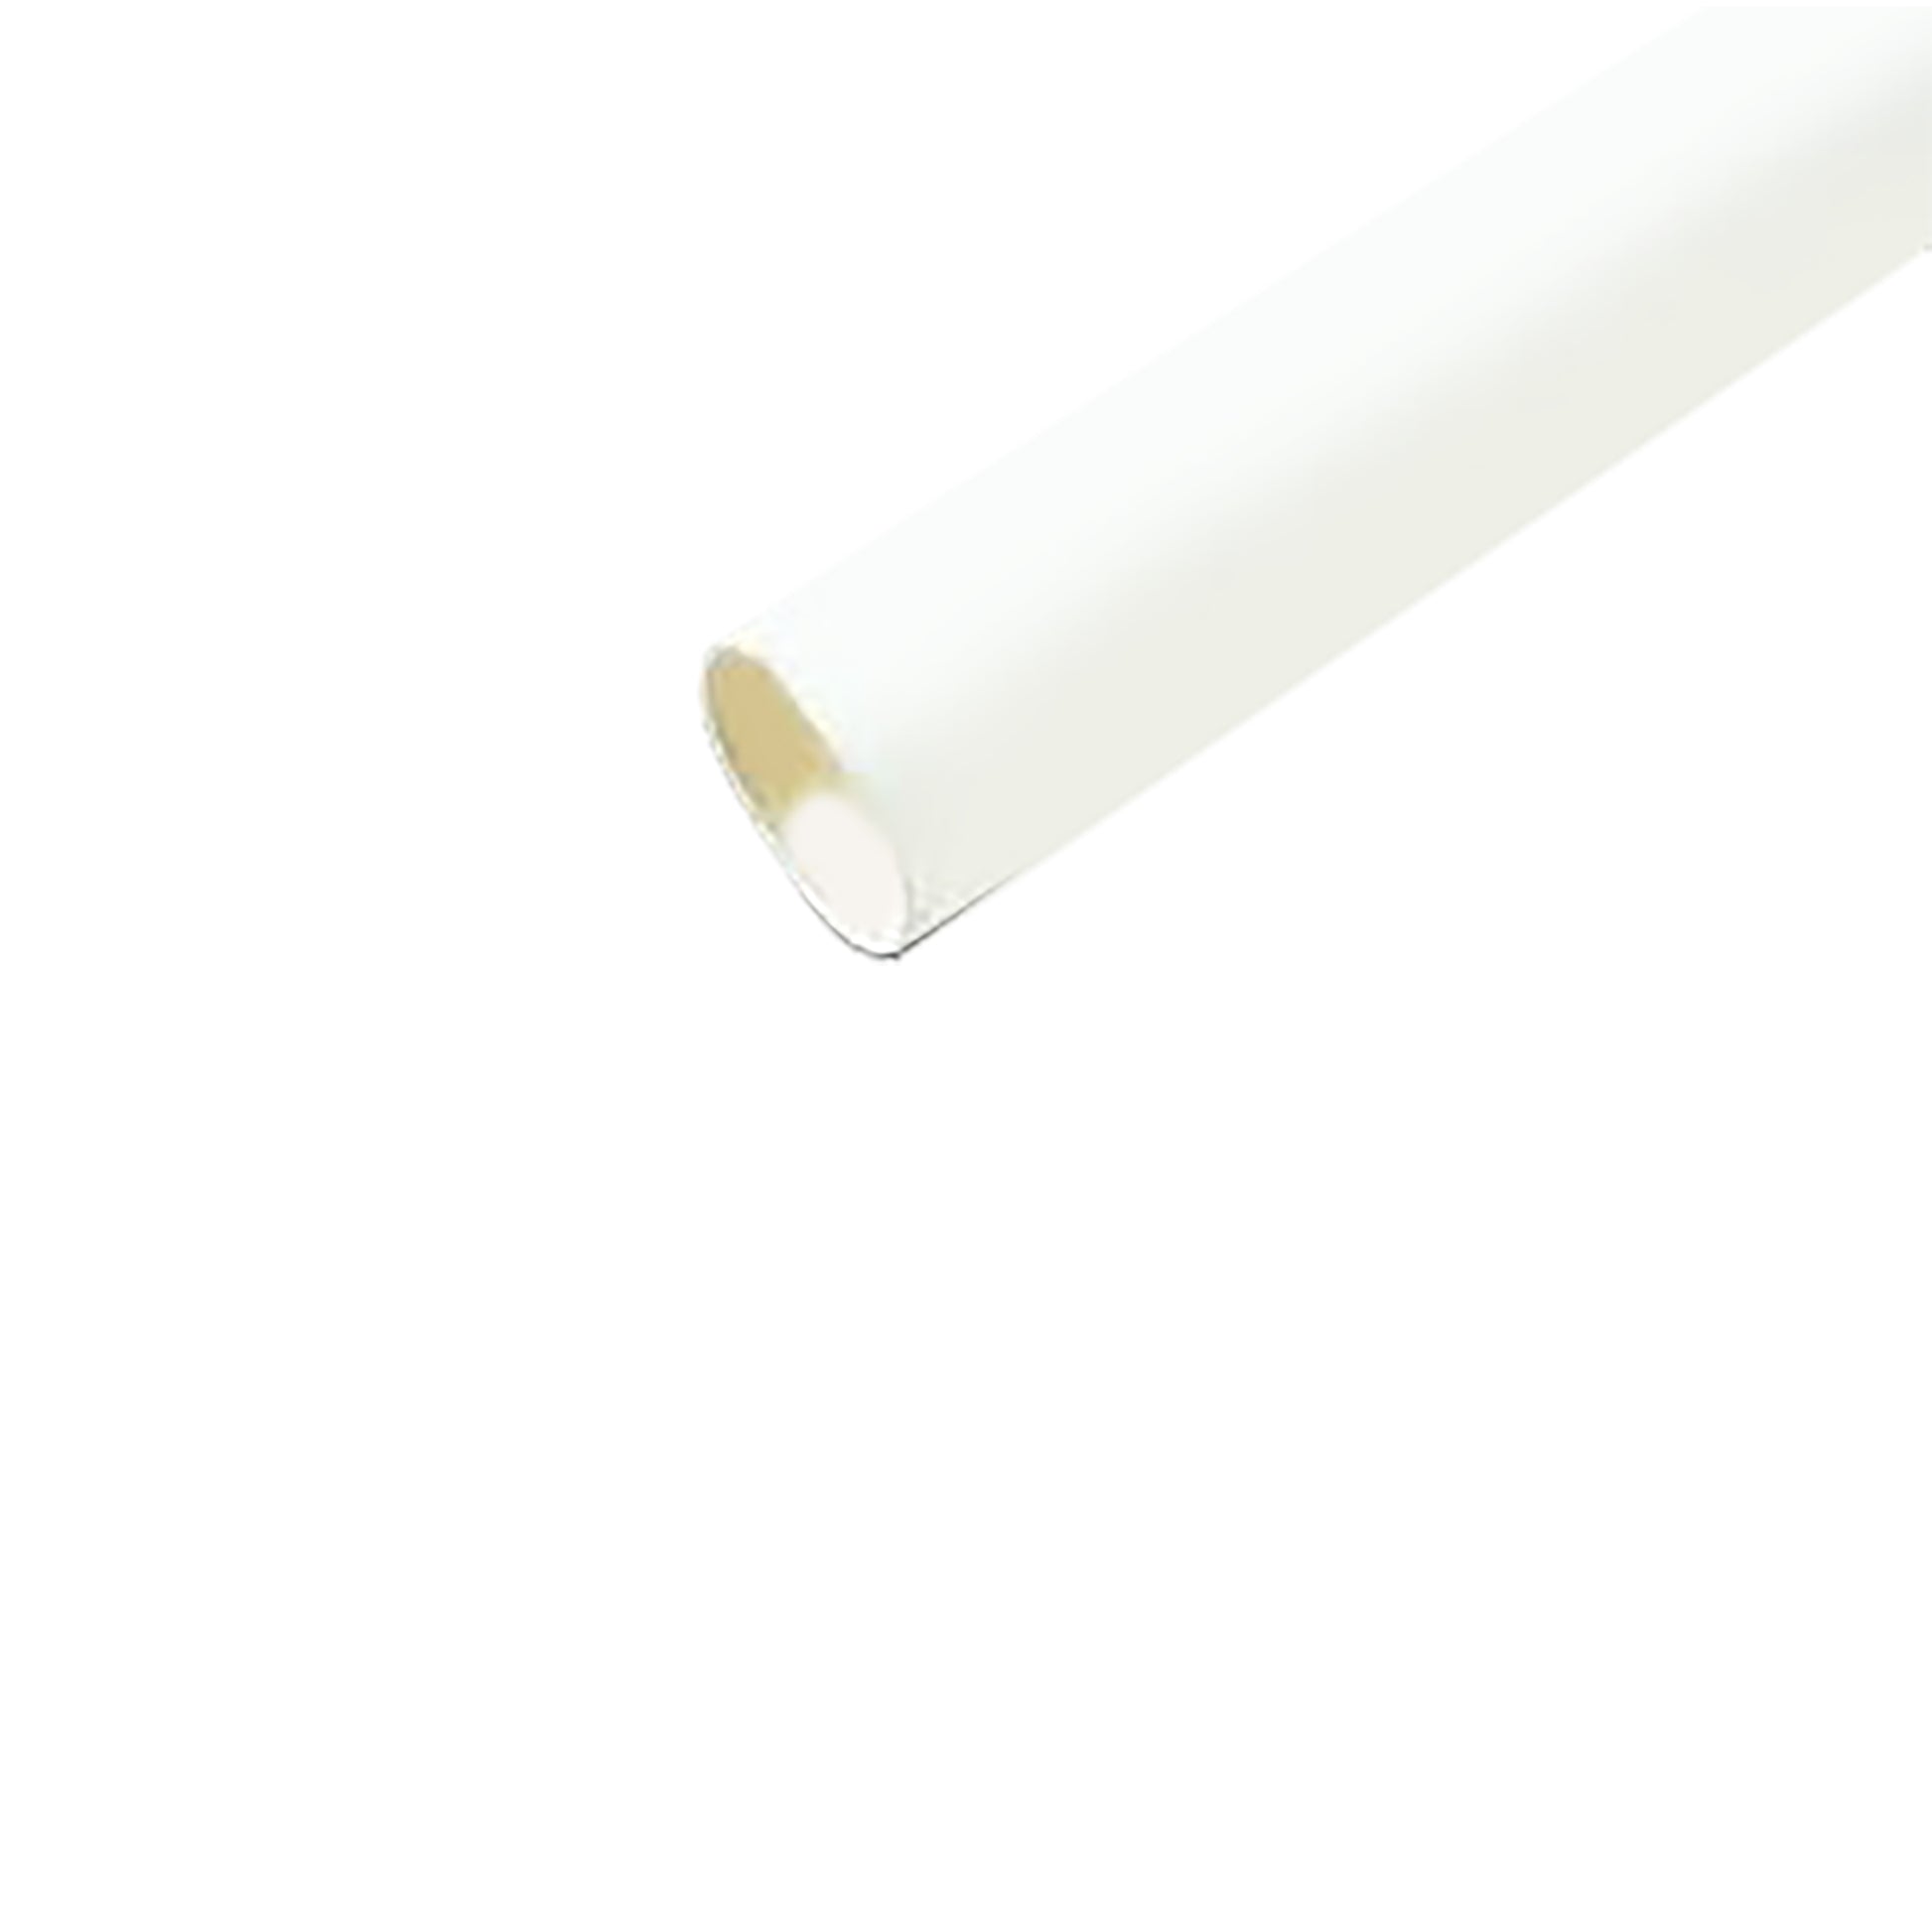 Flexible Thin Single Wall Non-Adhesive Heat Shrink Tubing 2:1 White 3/32" ID - 48" Inch 4 Pack